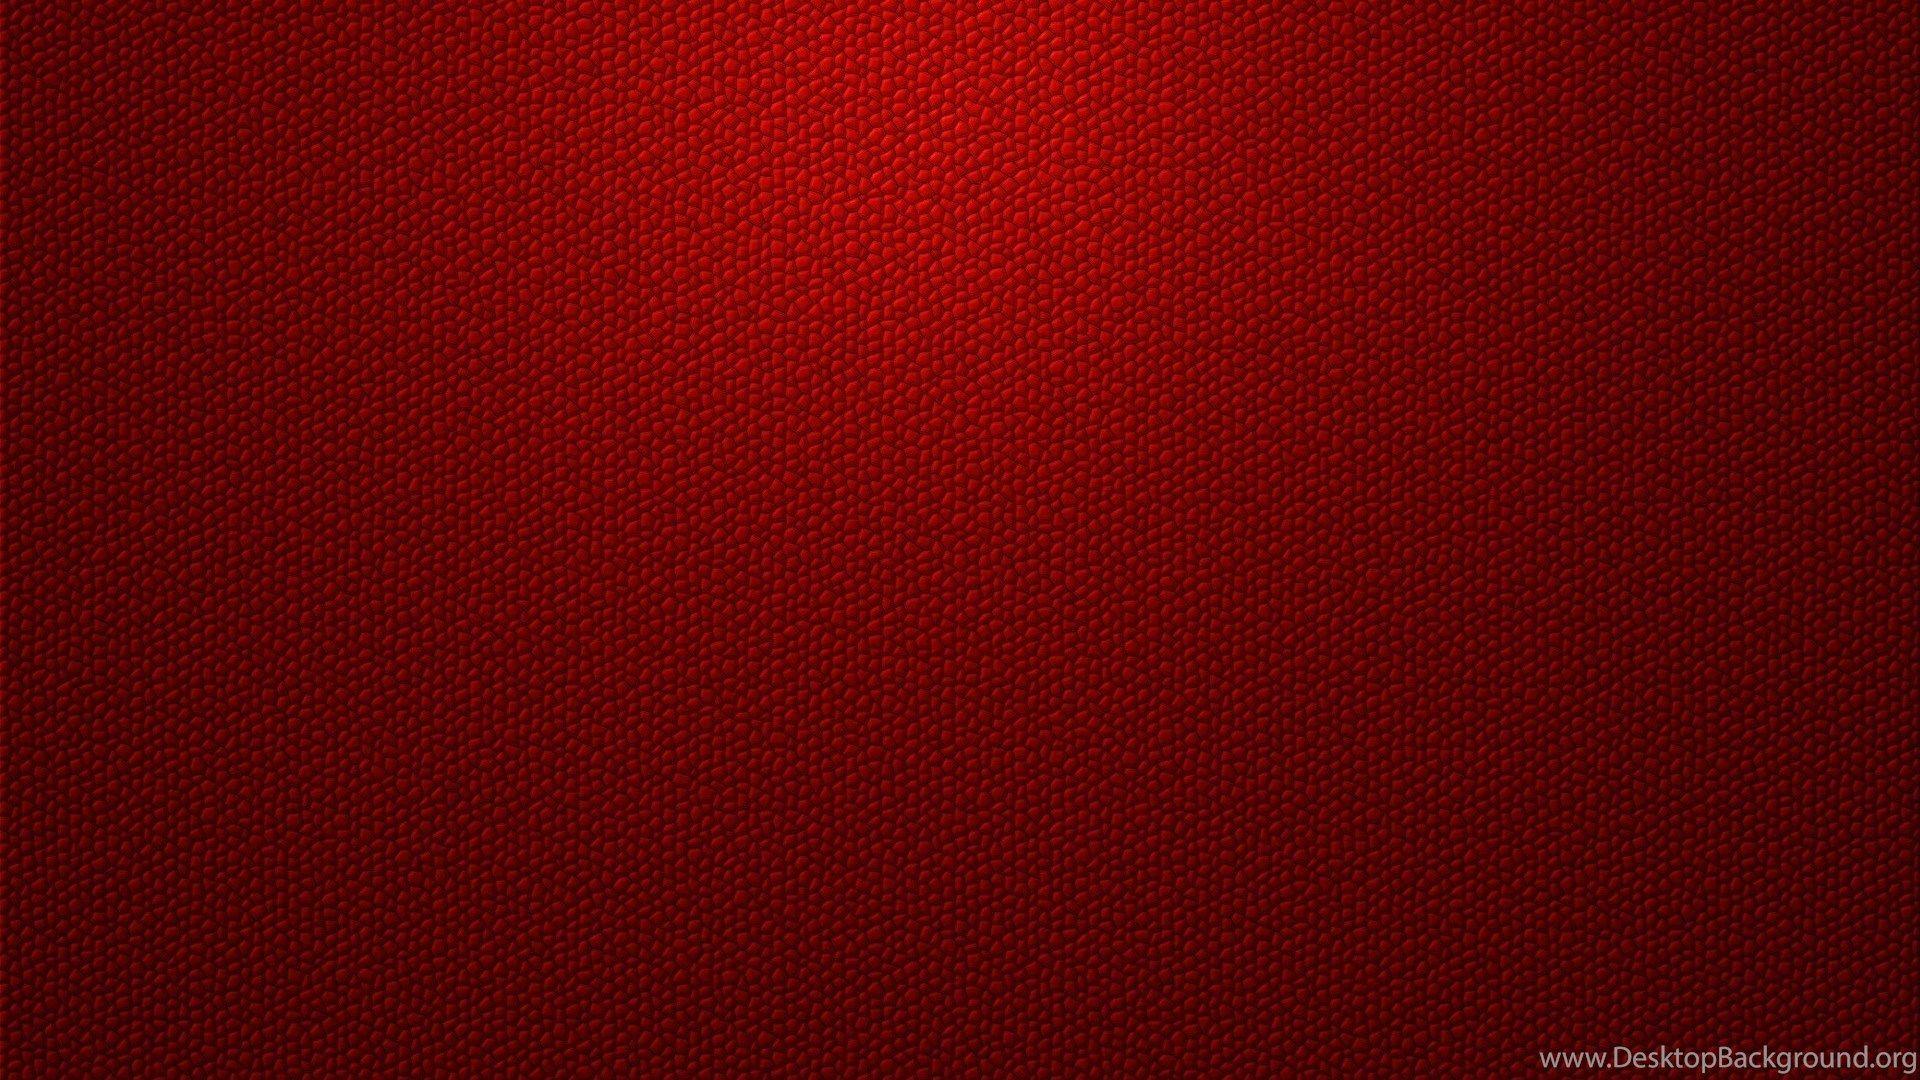 Simple Dark Red Solid Color Wallpaper Background Wallpaper Image For Free  Download  Pngtree  Red background images Dark red wallpaper Dark red  background